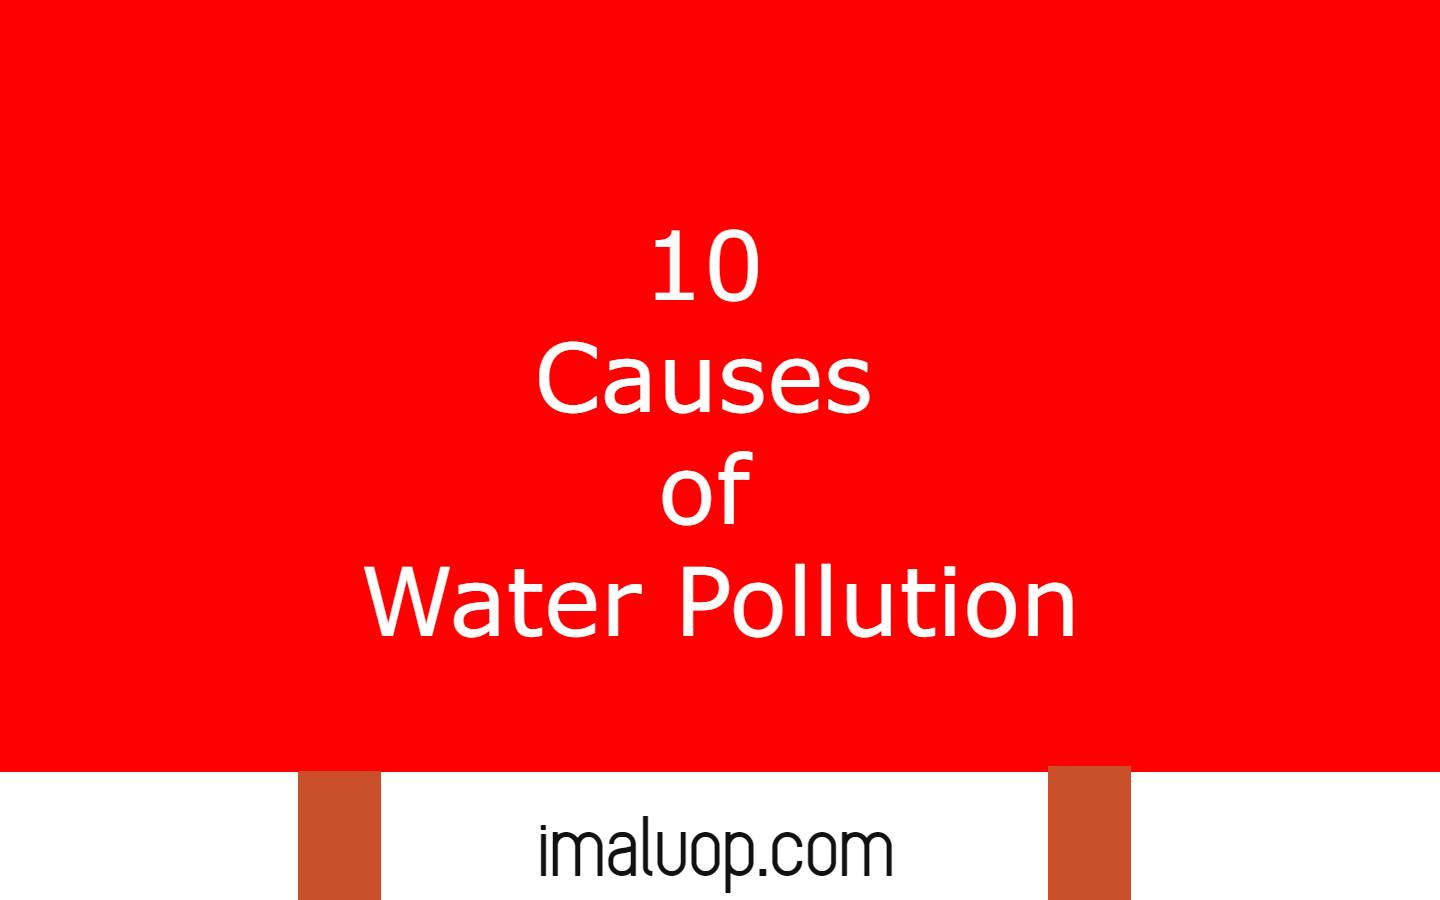 10 Causes of Water Pollution